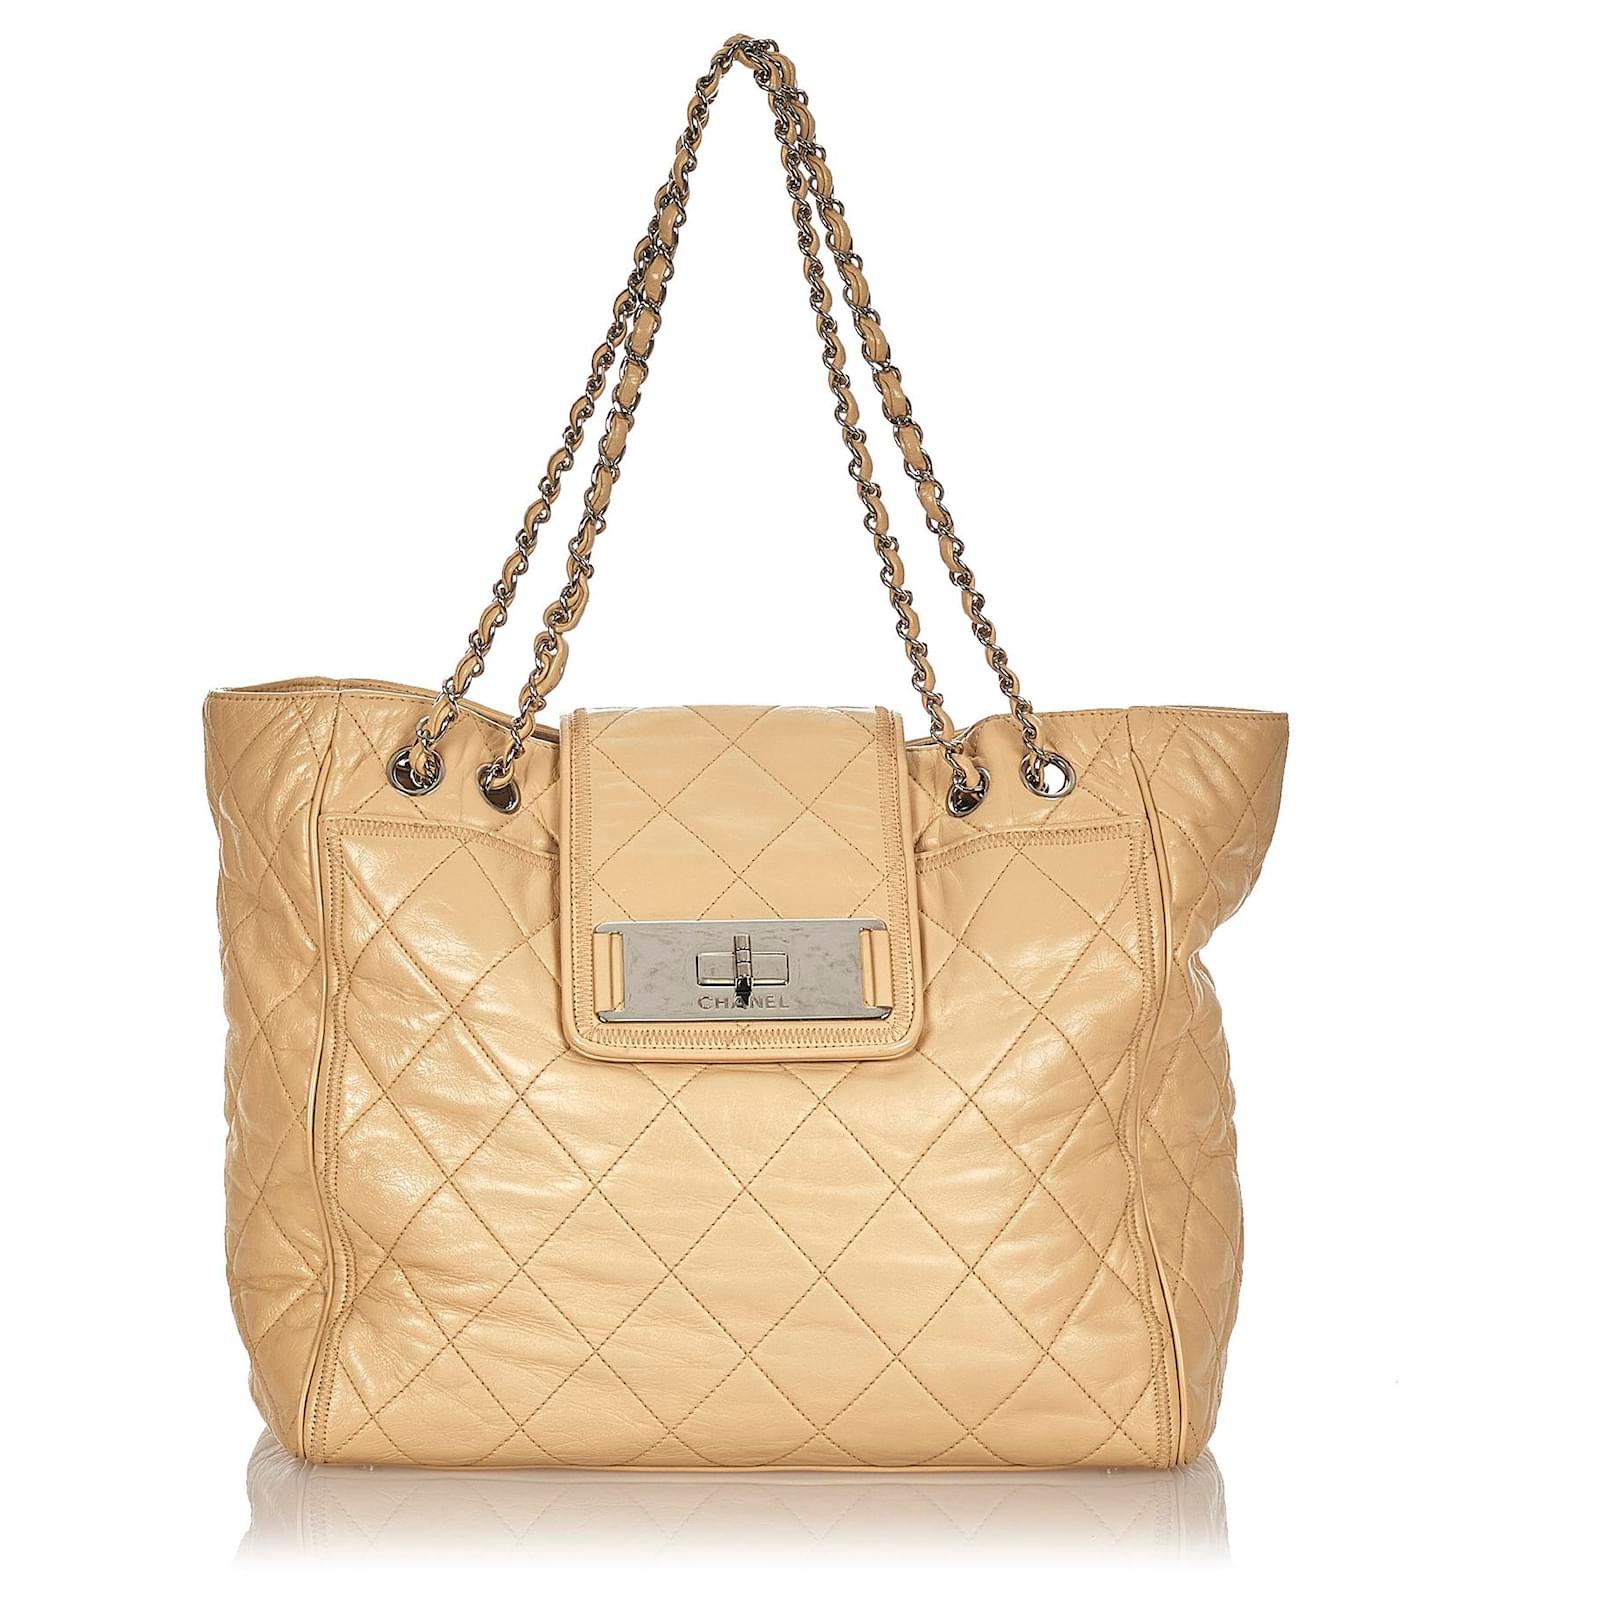 Chanel Brown Matelasse Reissue East West Tote Bag Beige Leather